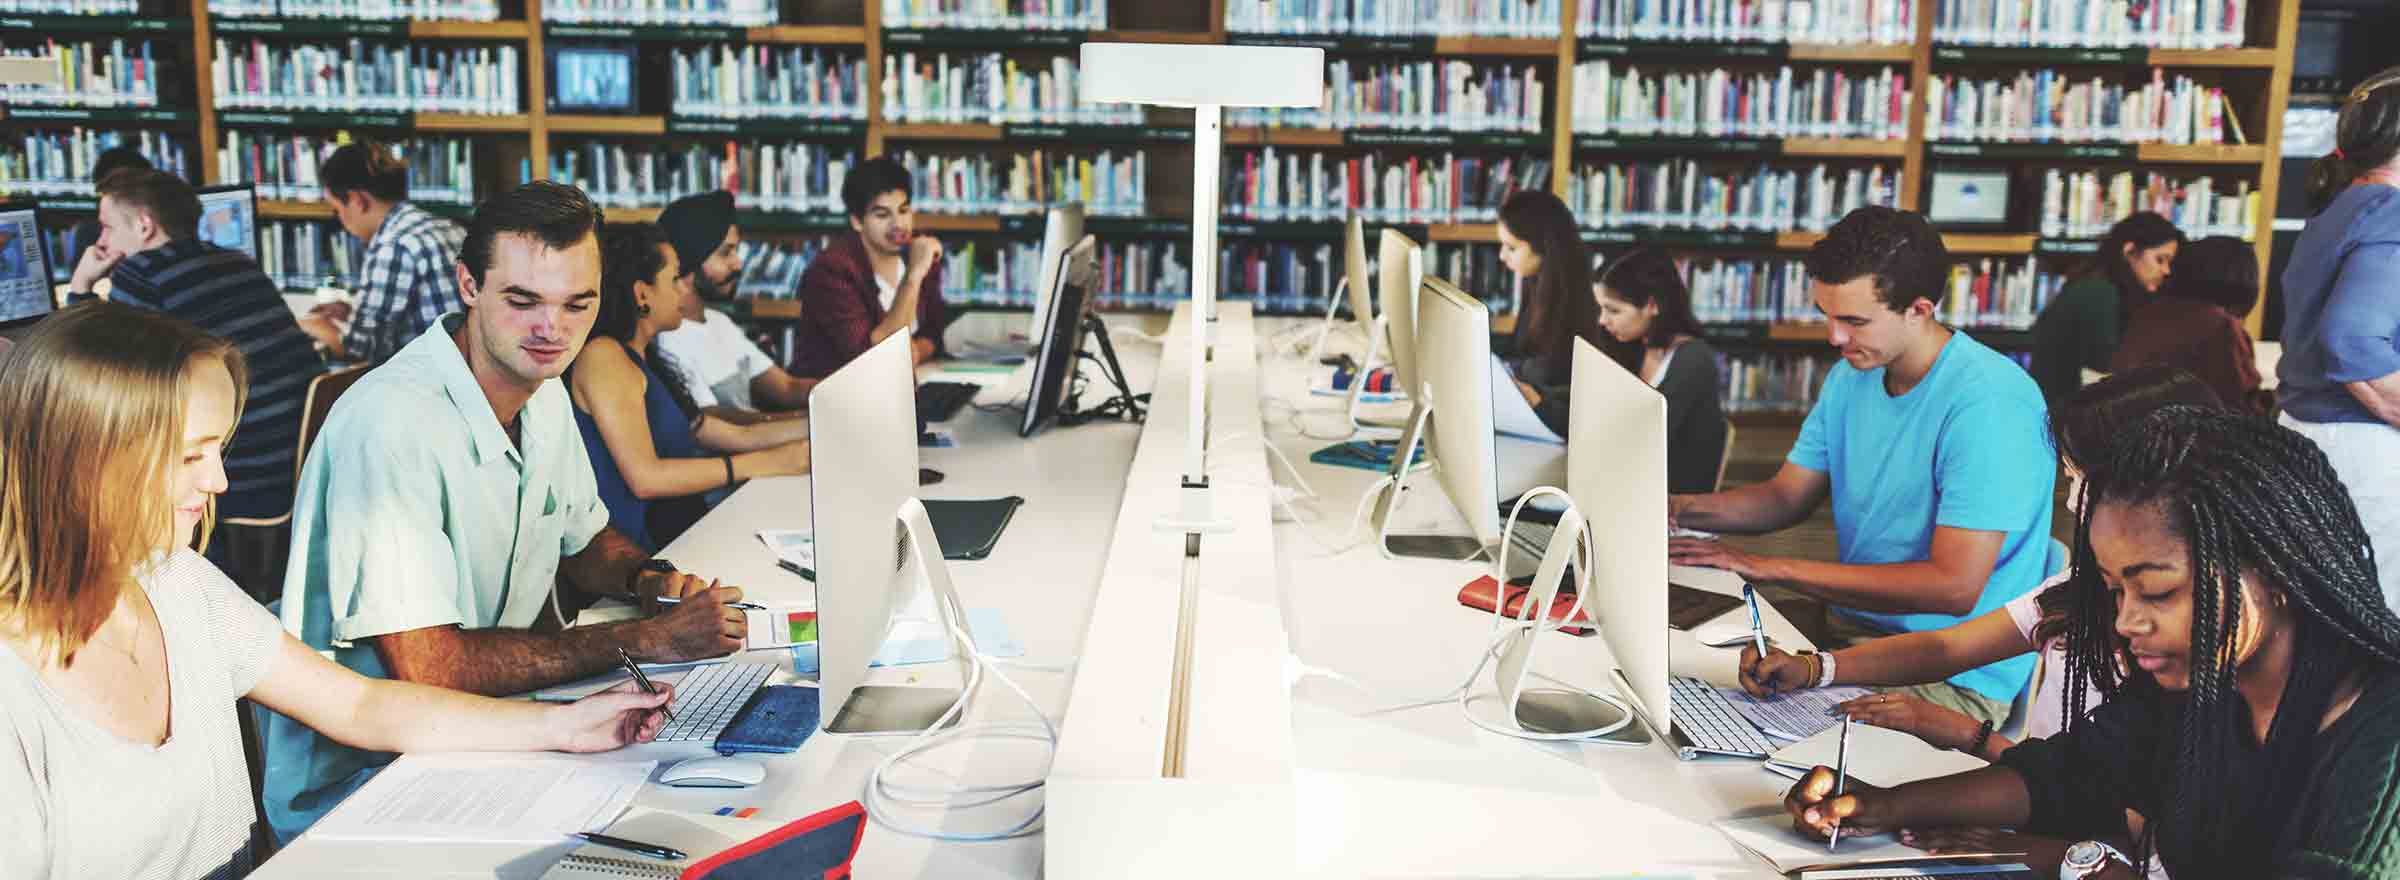 two rows of young people using computers at a library